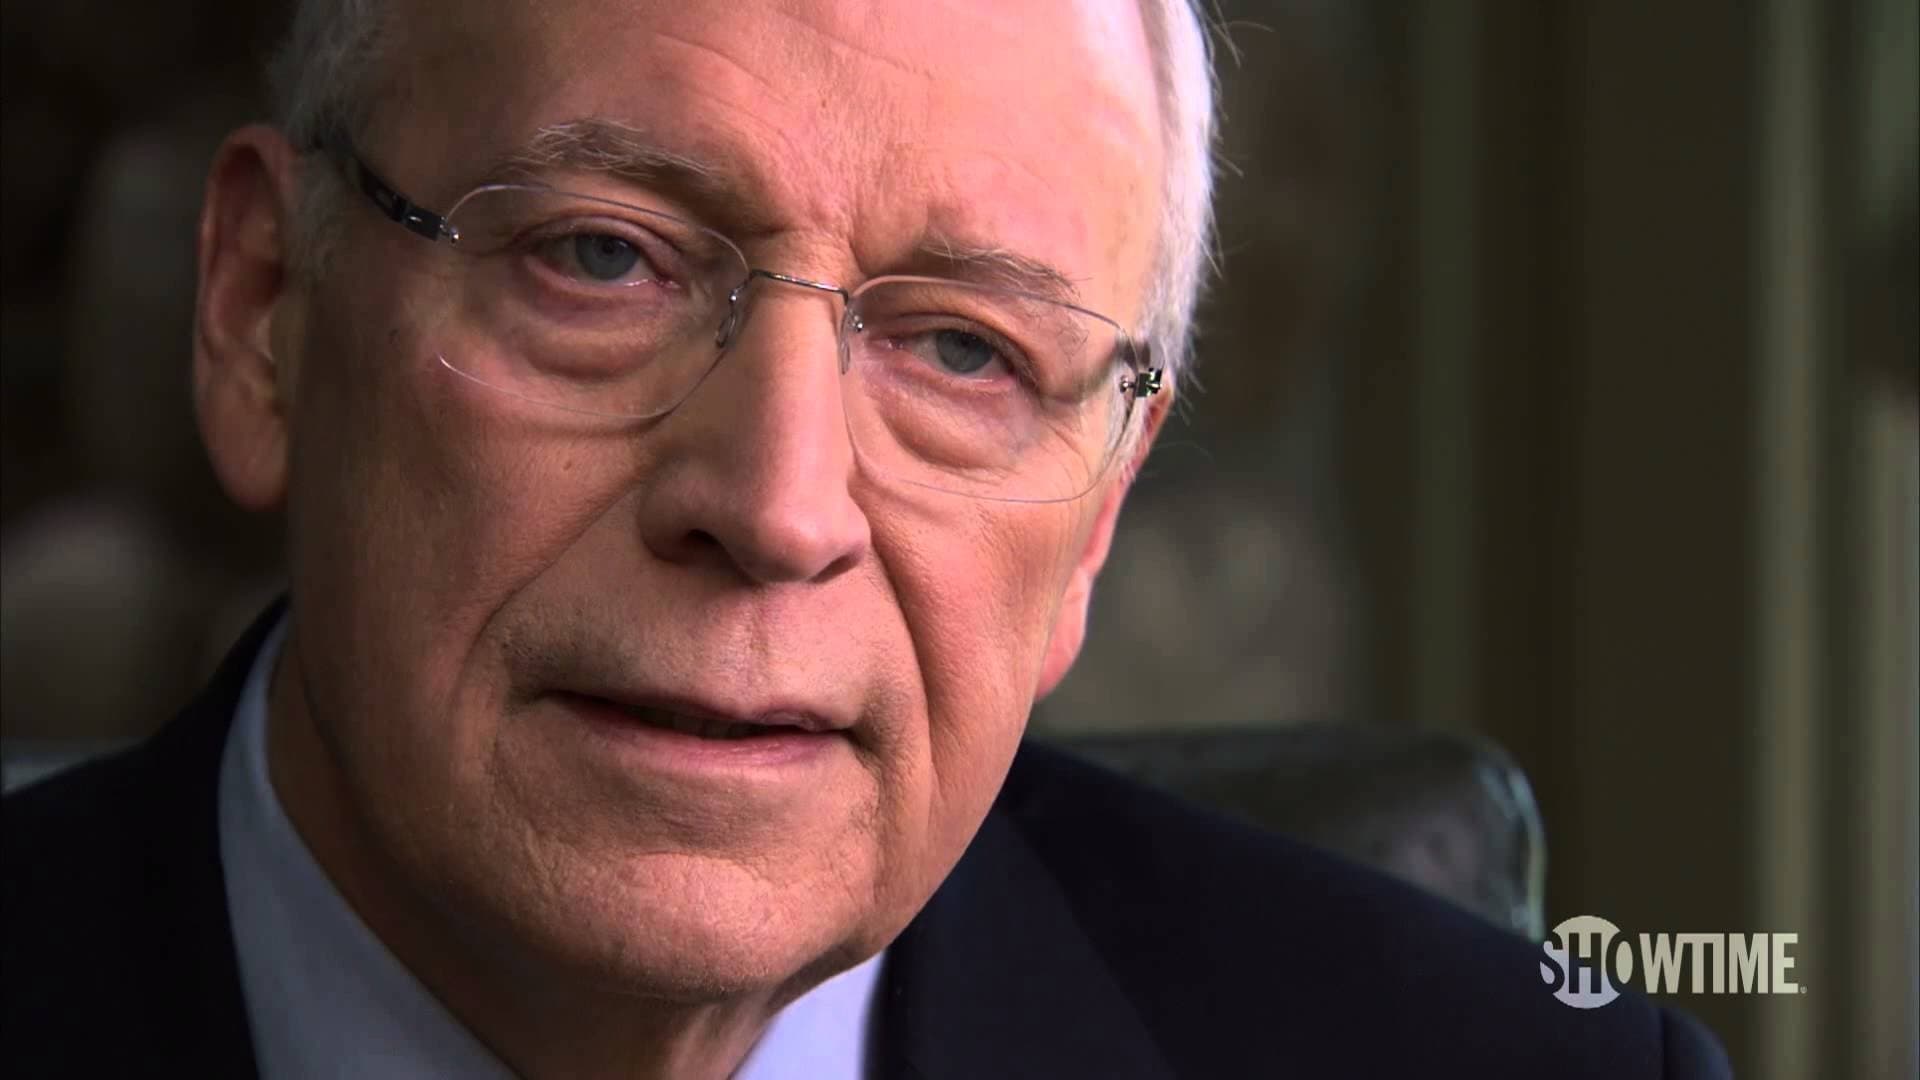 Dick cheney movie release date